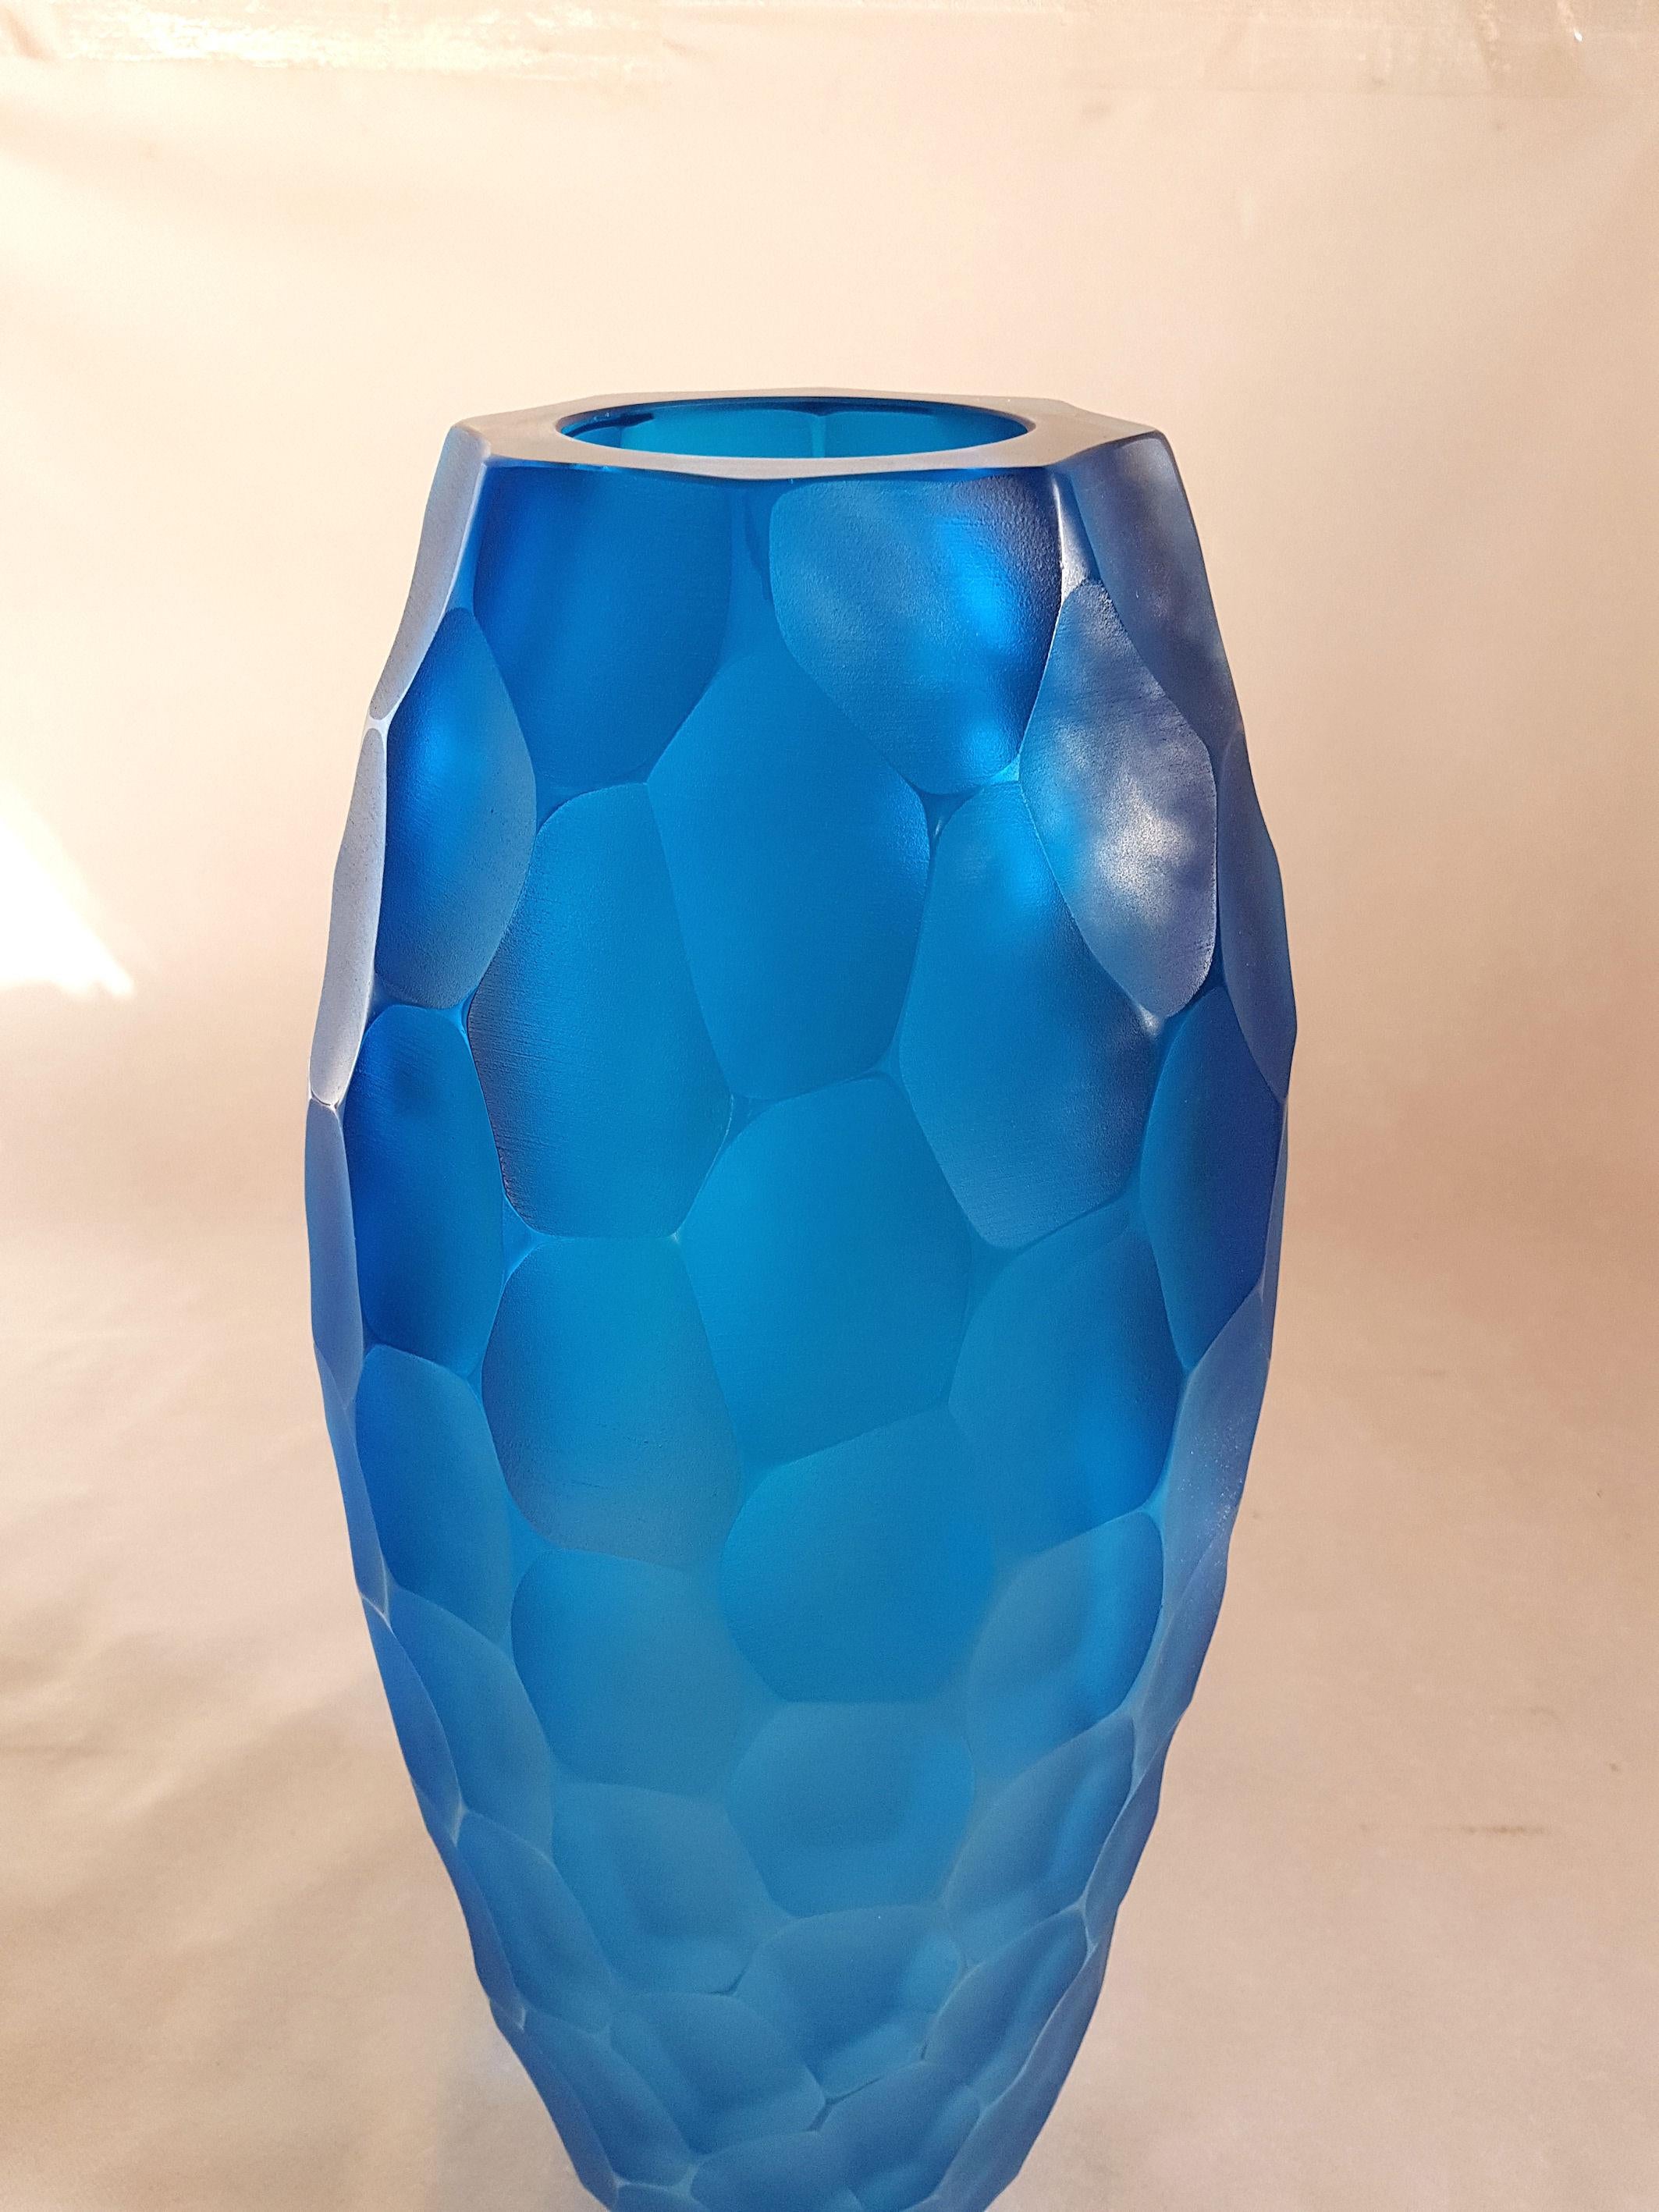 Sigle very large, blue translucent thick Murano glass vase, or urn.
By Simone Cenedese, Murano, Italy, 1980s.
The Murano glass is faceted outside, a kind of bamboo style, creating matt and shiny contrasted effects.
A beautiful piece of Murano